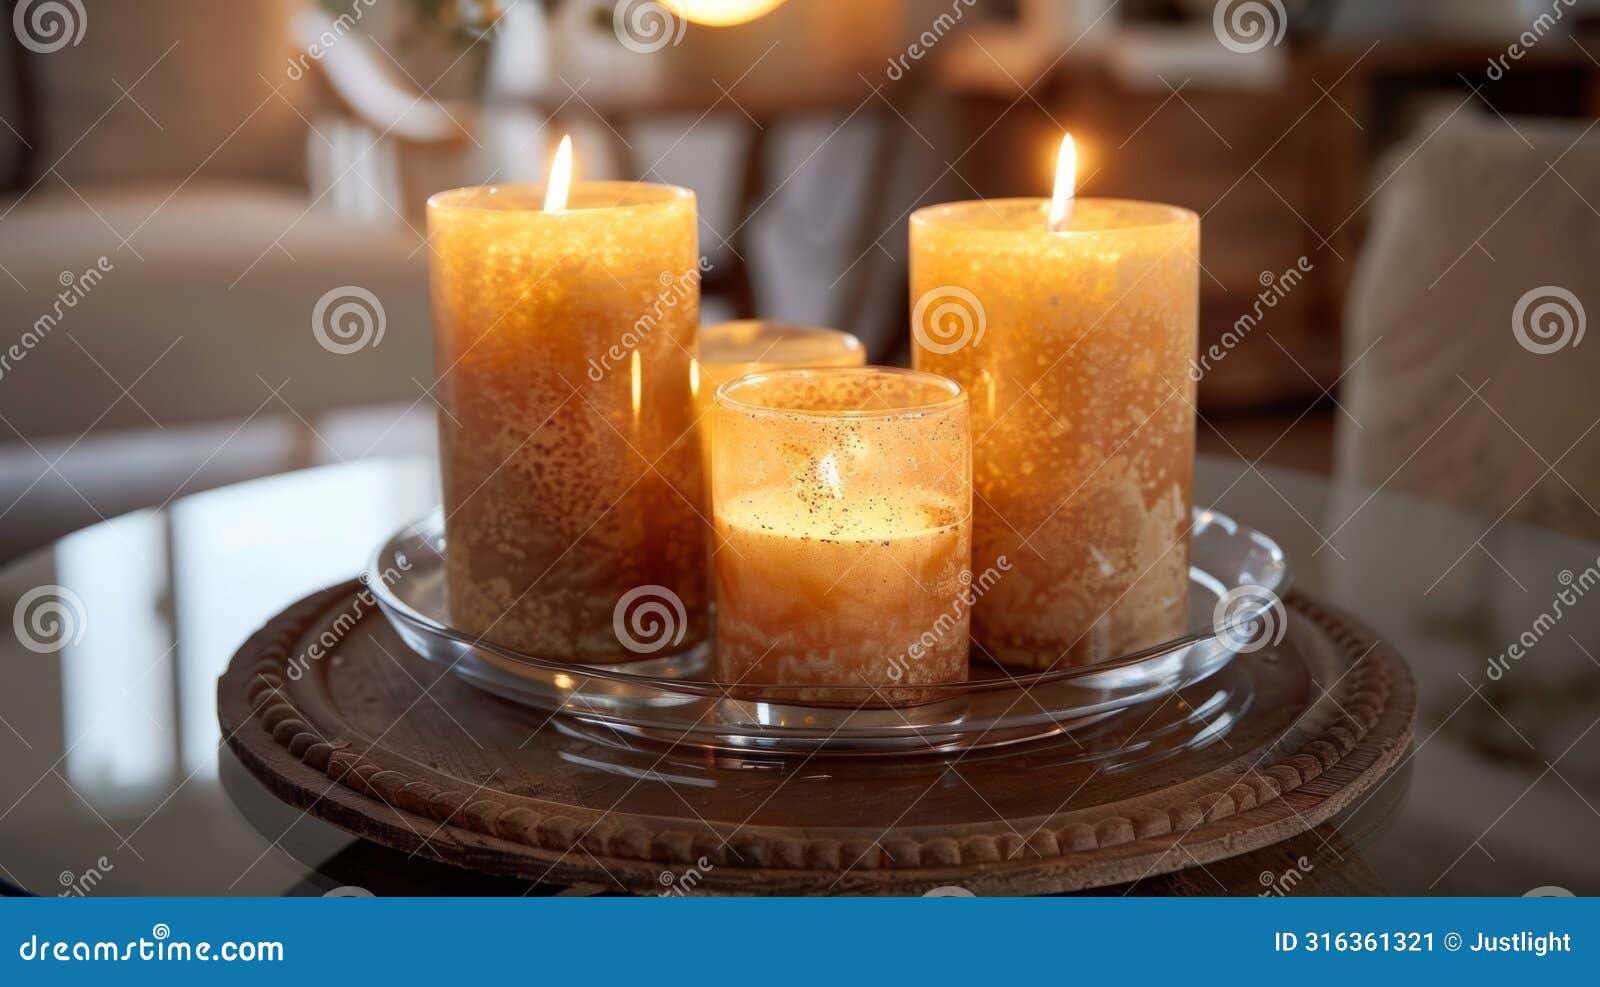 in the center of a round glass dining table a group of rustic mismatched candles casts a warm glow over the room. 2d